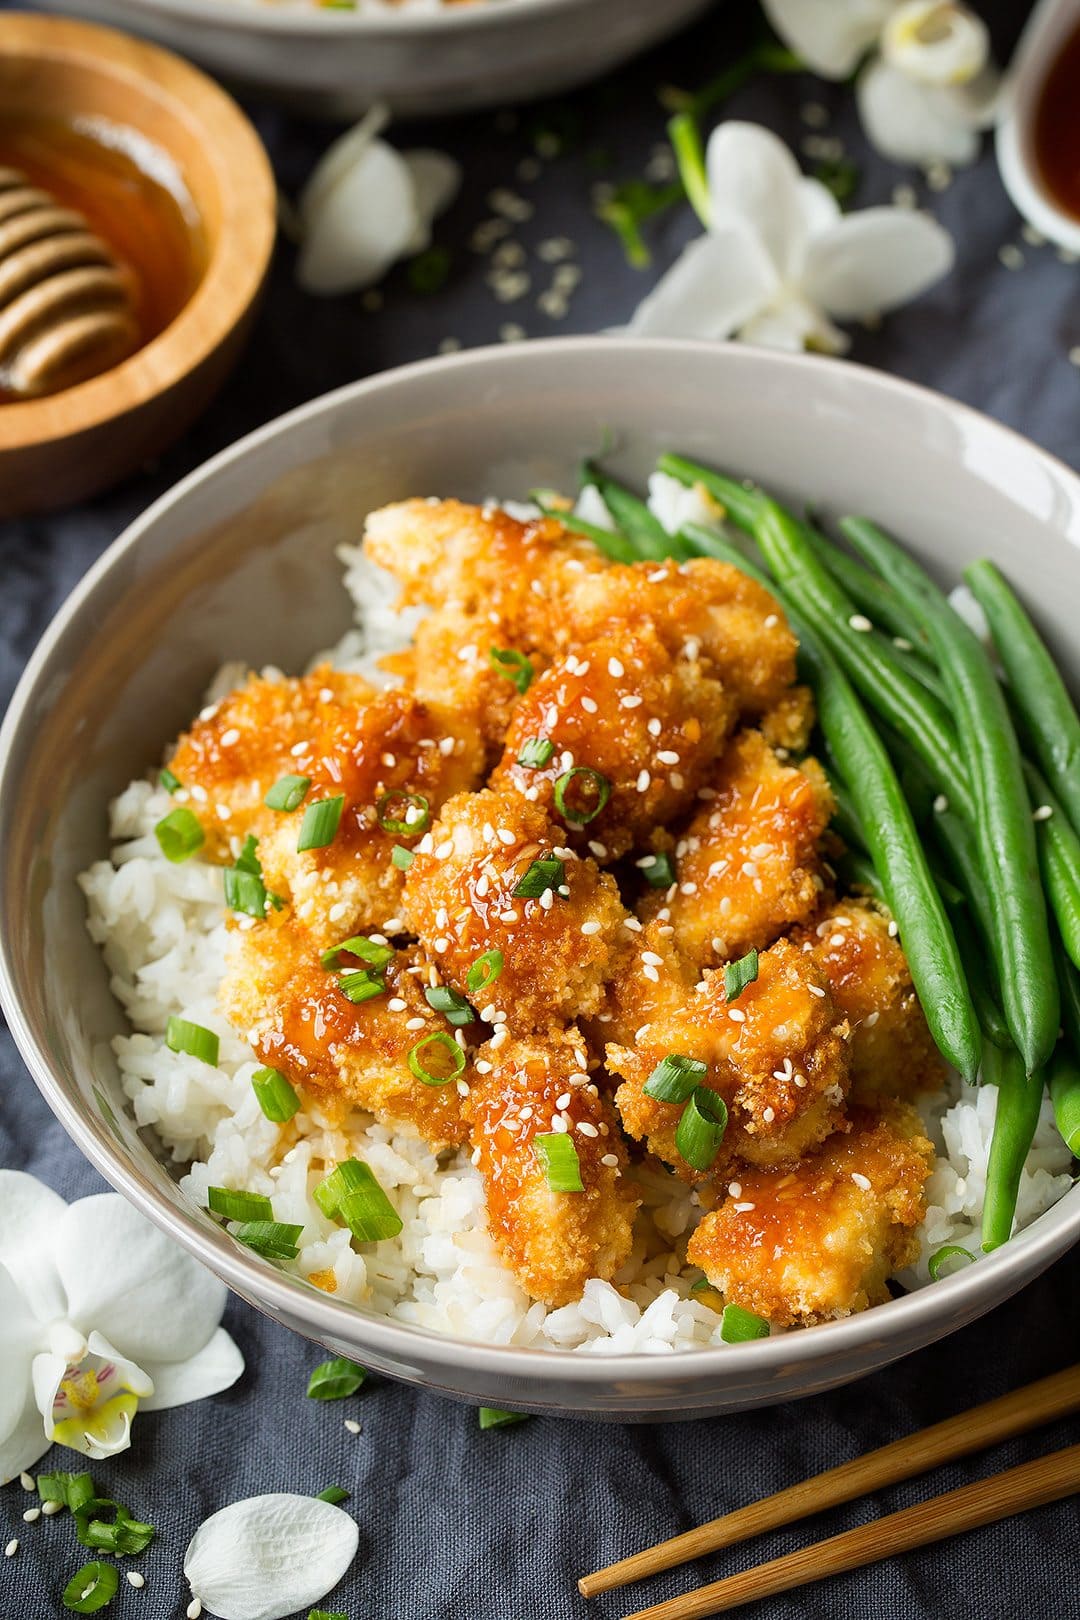 Honey Garlic Chicken set over a layer of rice in a grey bowl with a side of green beans. Bowl sitting on a grey tablecloth and decorated with white orchids.